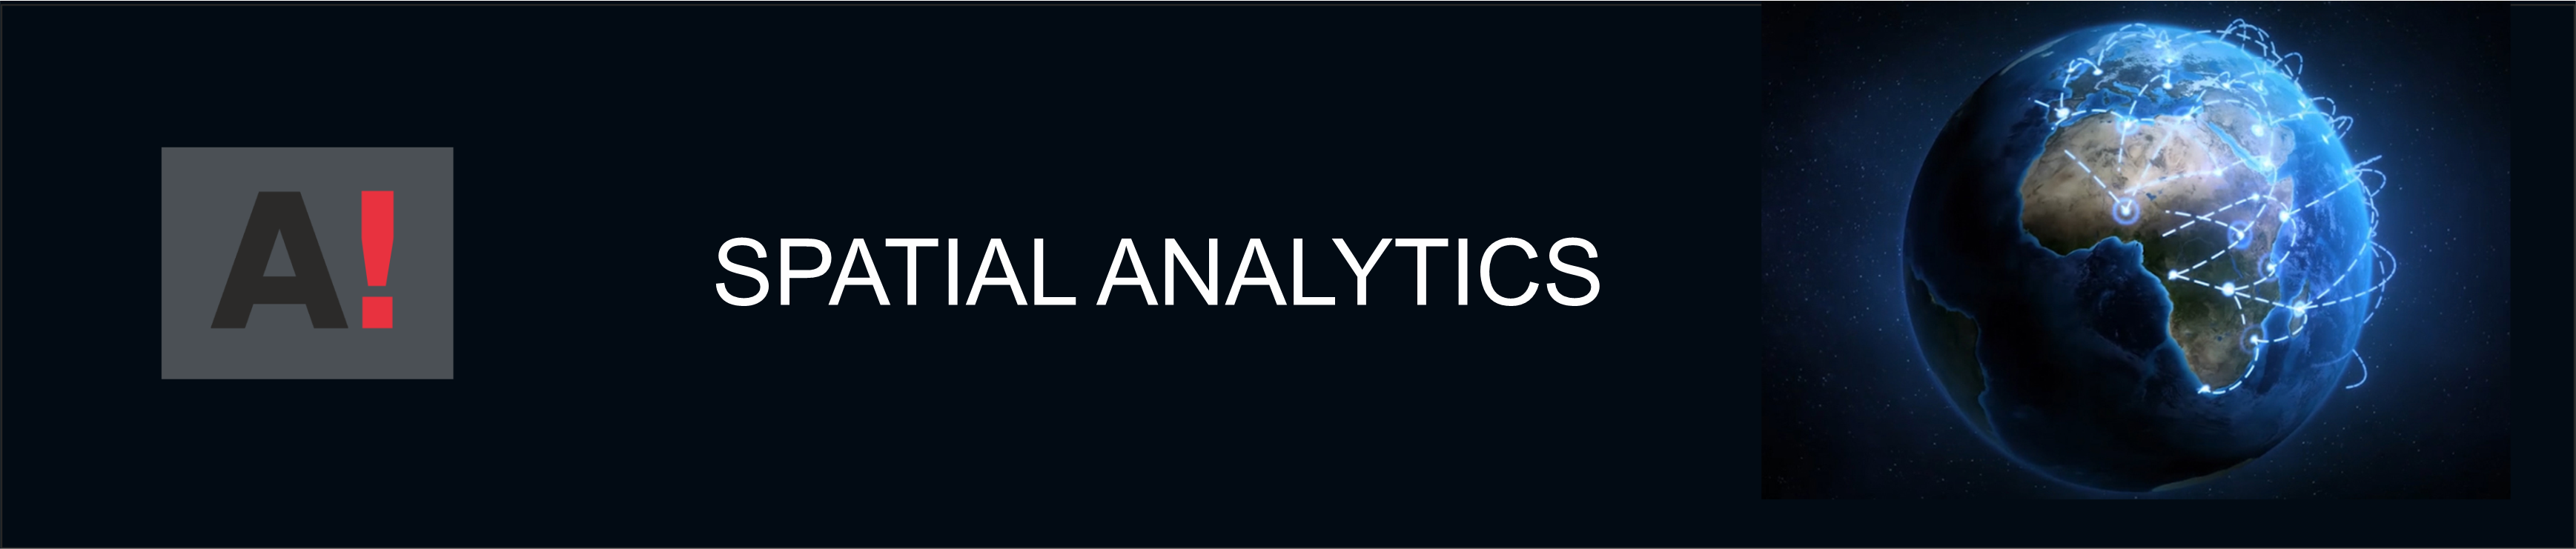 _images/Spatial-analytics-logo.png